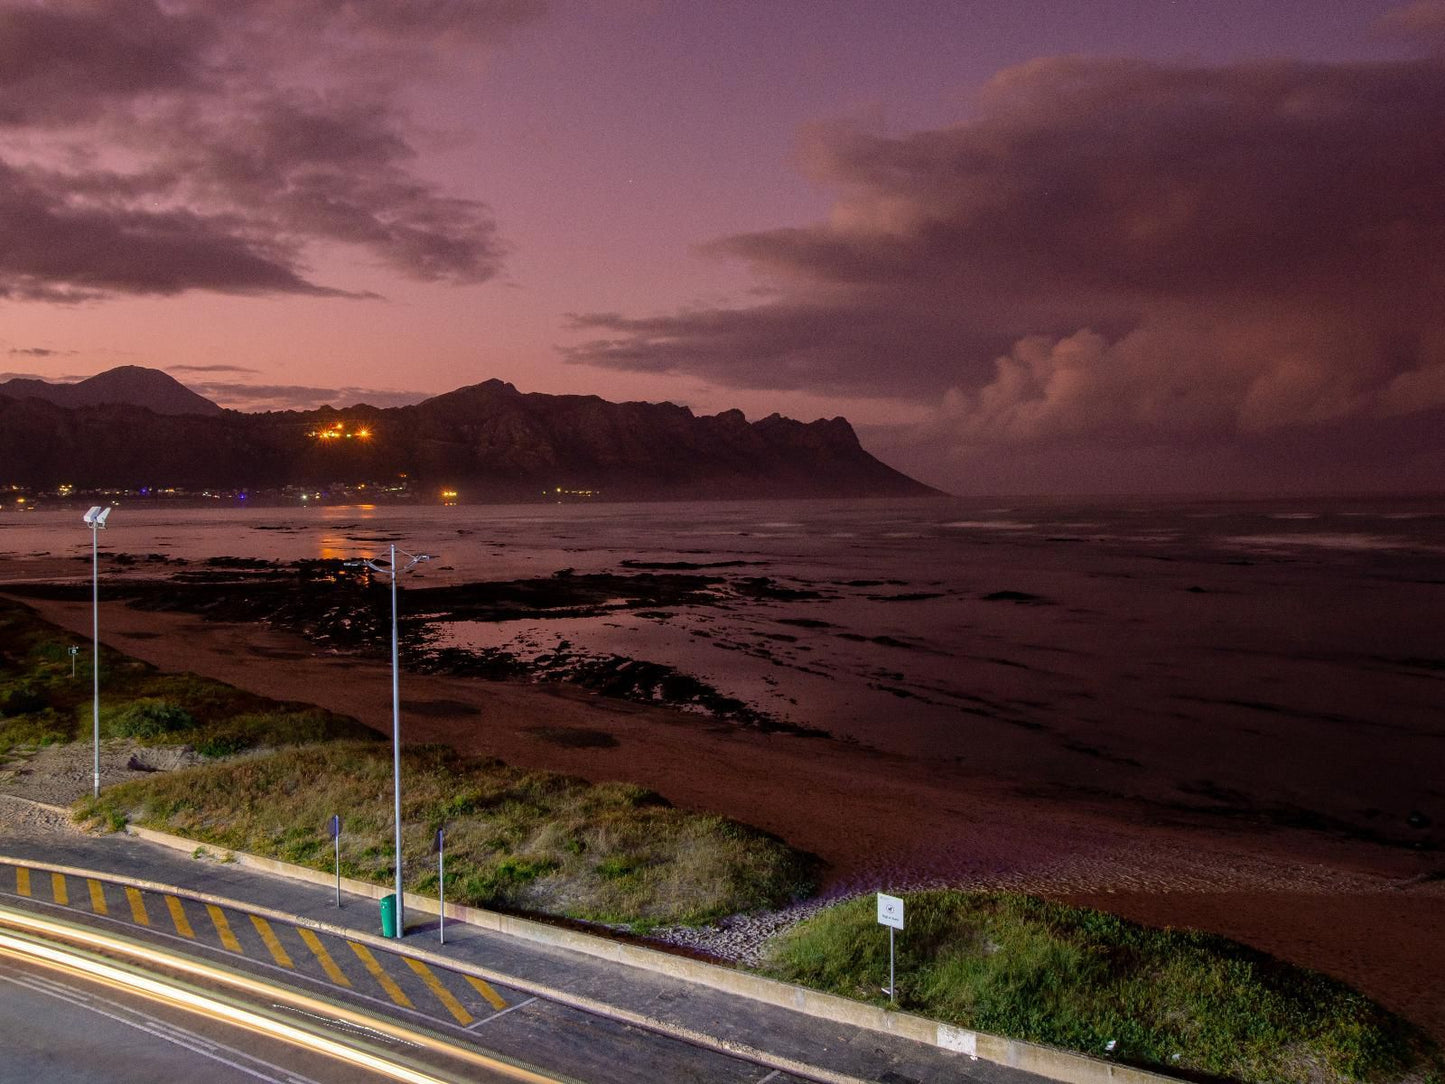 Ocean Breeze Hotel Strand Western Cape South Africa Beach, Nature, Sand, Tower, Building, Architecture, Framing, Highland, Light Trails, Street